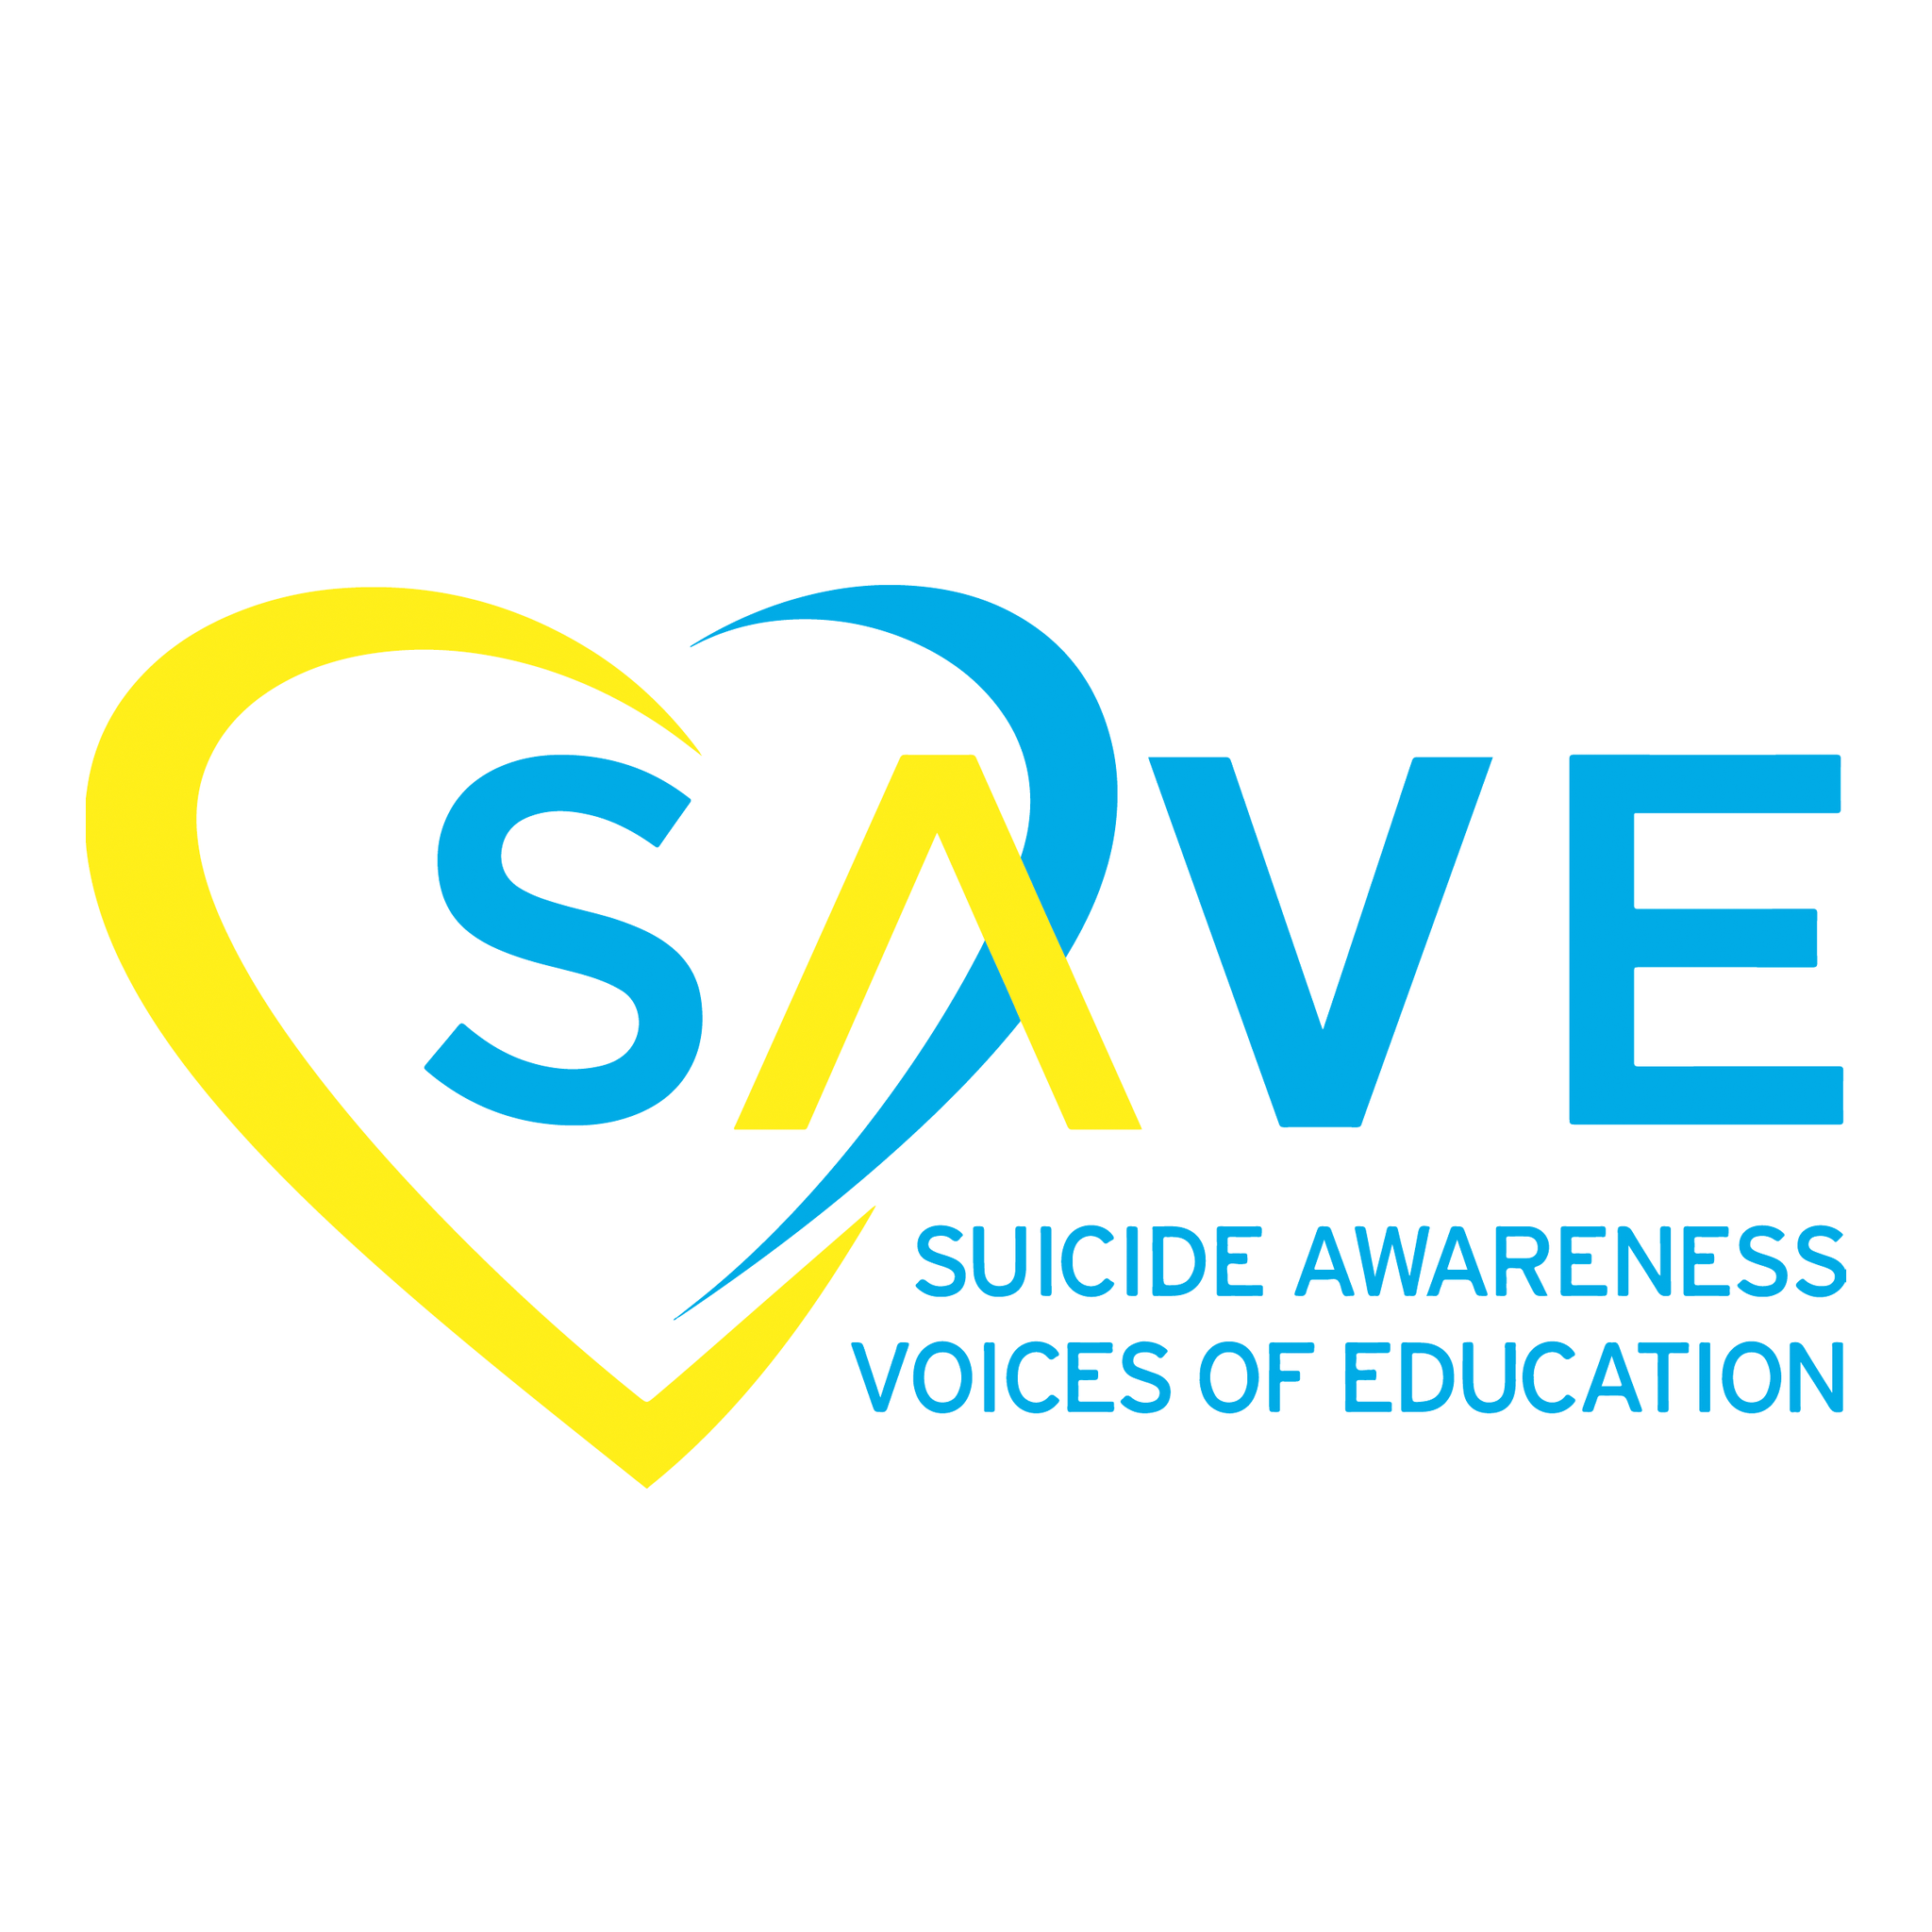 SAVE - Suicide Awareness Voices of Education